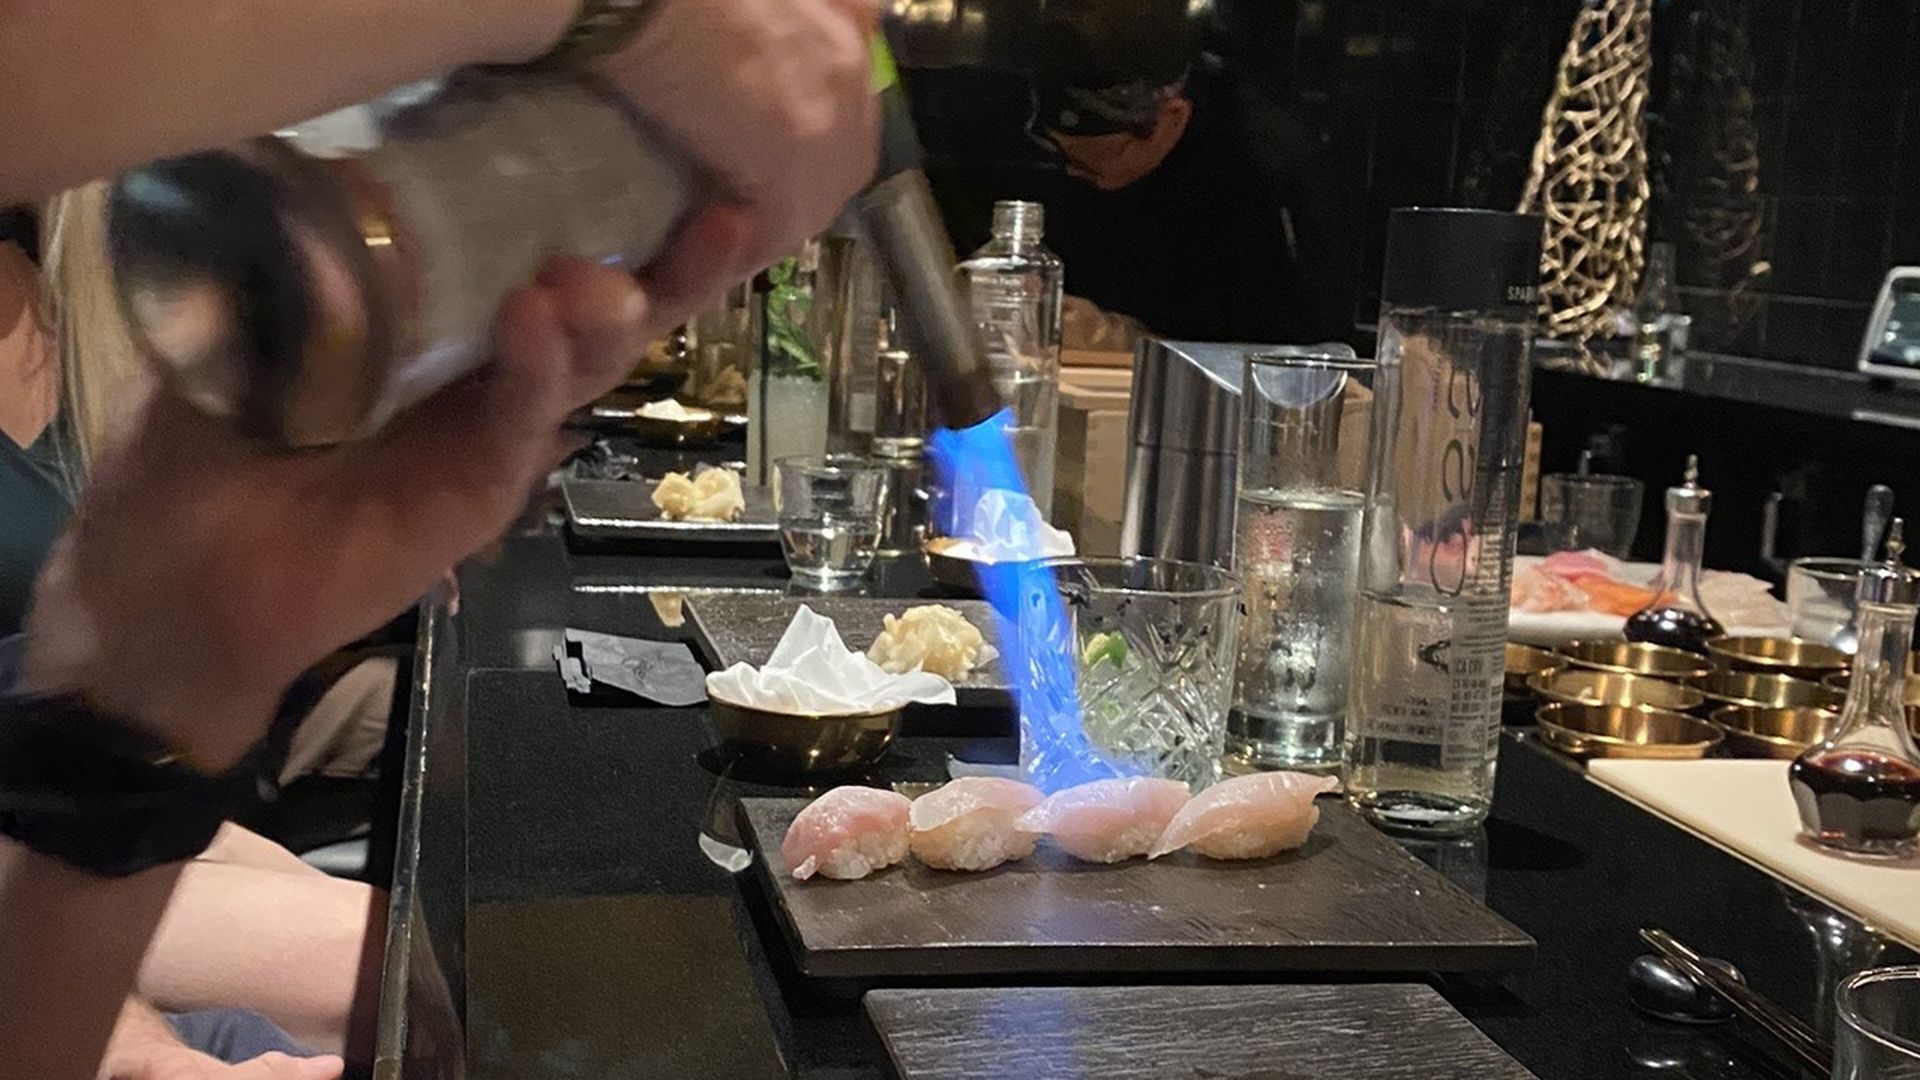 A person fires a flaming blowtorch at four pieces of sushi on a black plate. 